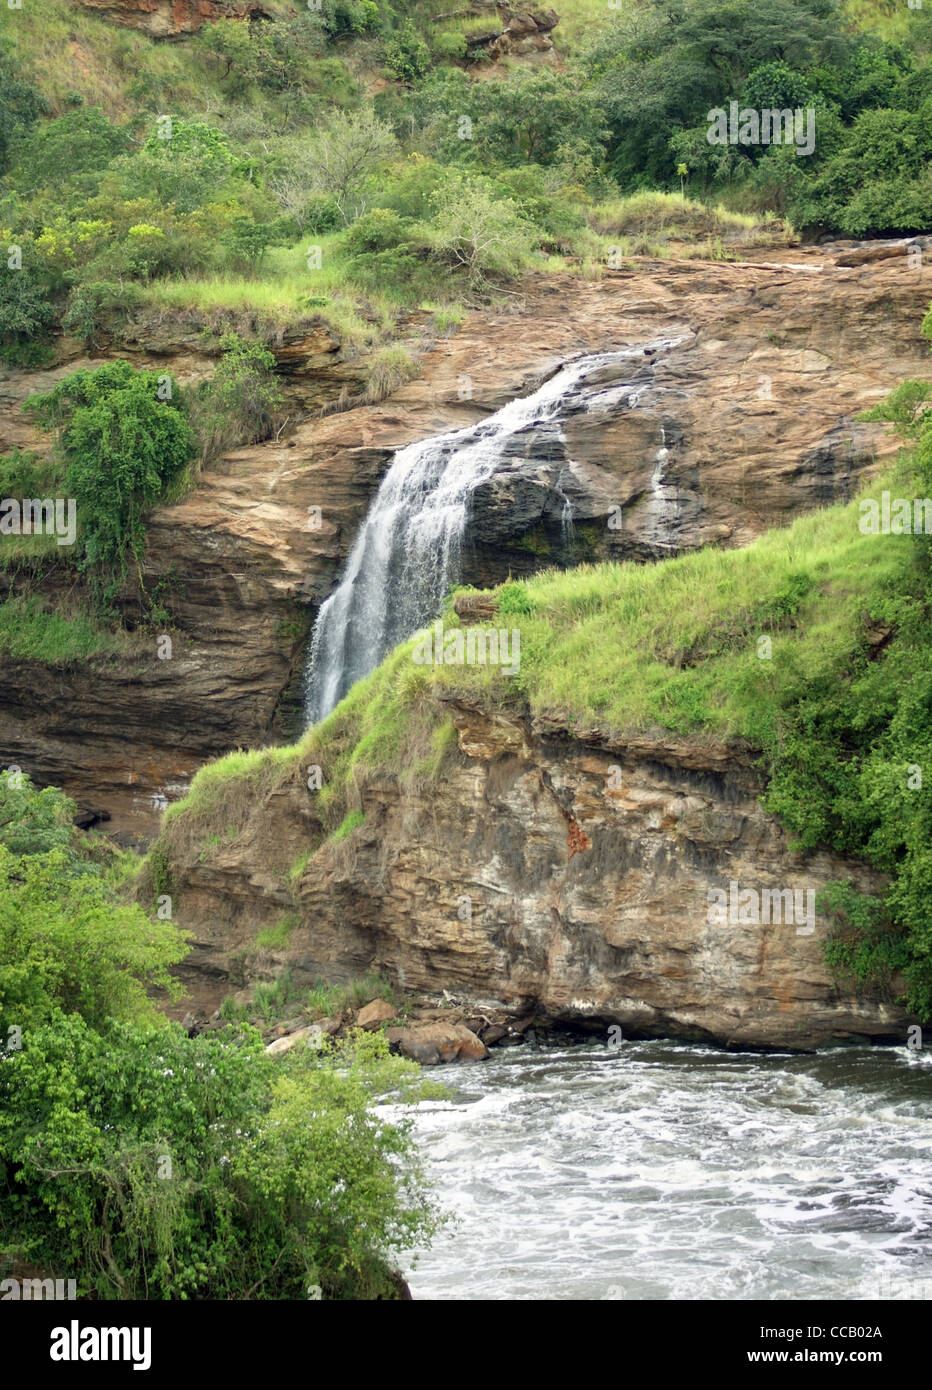 high angle detail of the Murchison Falls in Uganda (Africa) Stock Photo